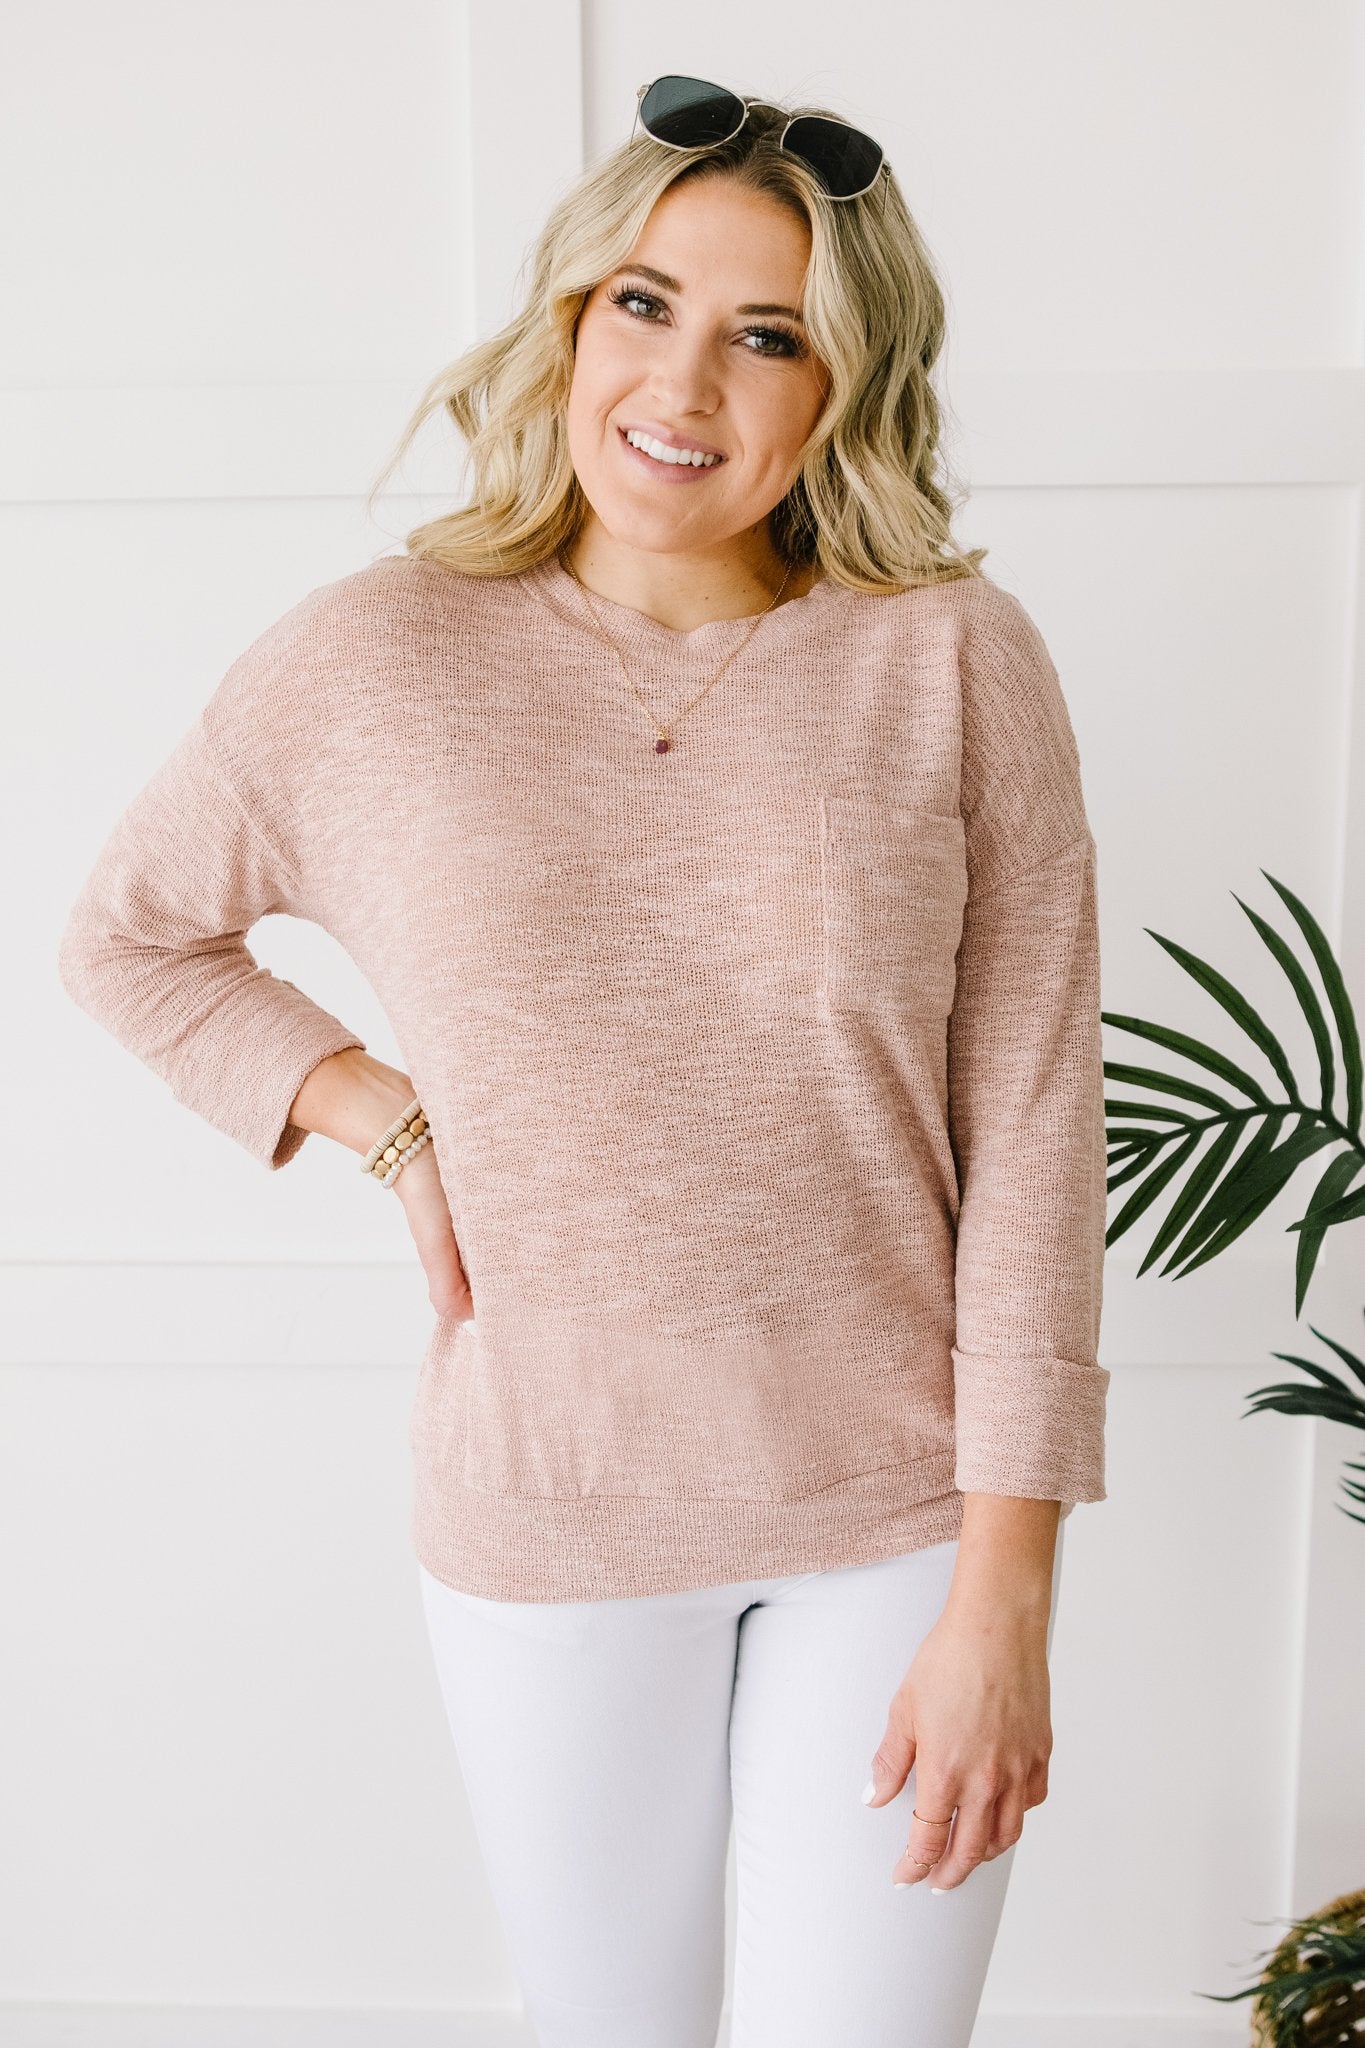 All Over It Top In Dusty Pink (Online Exclusives)